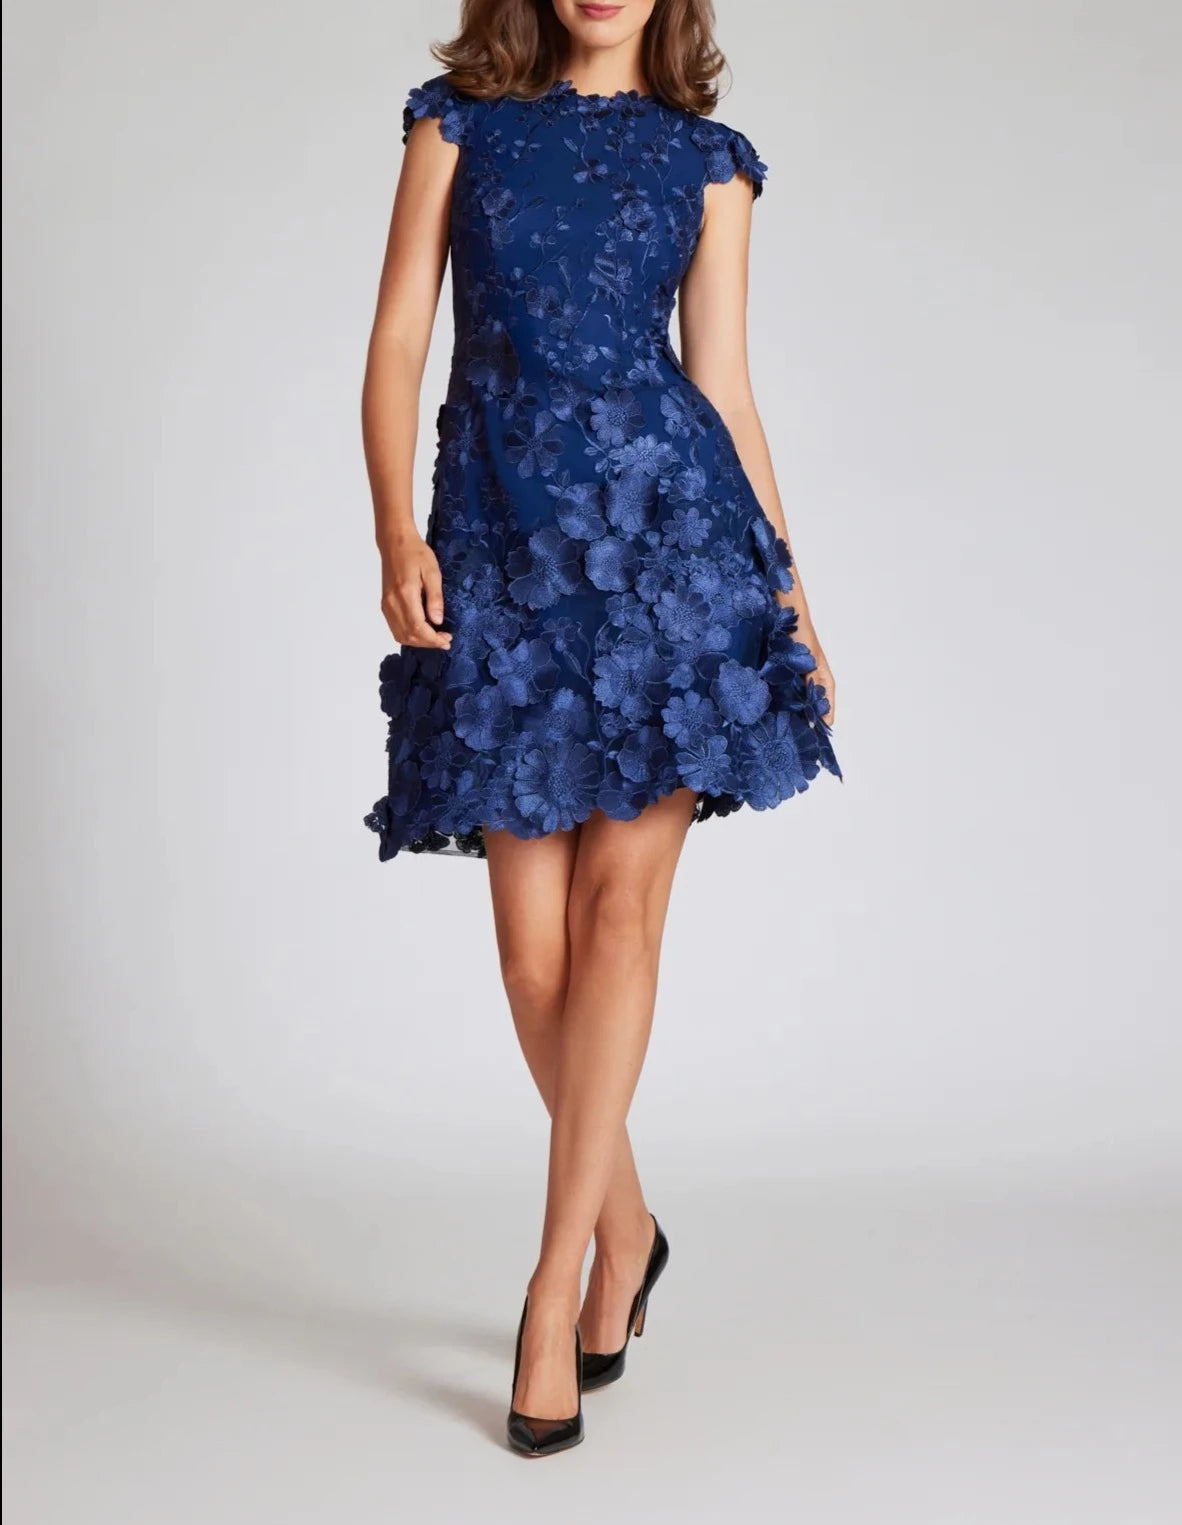 3D APPLIQUED FLORAL LACE FIT AND FLARE DRESS